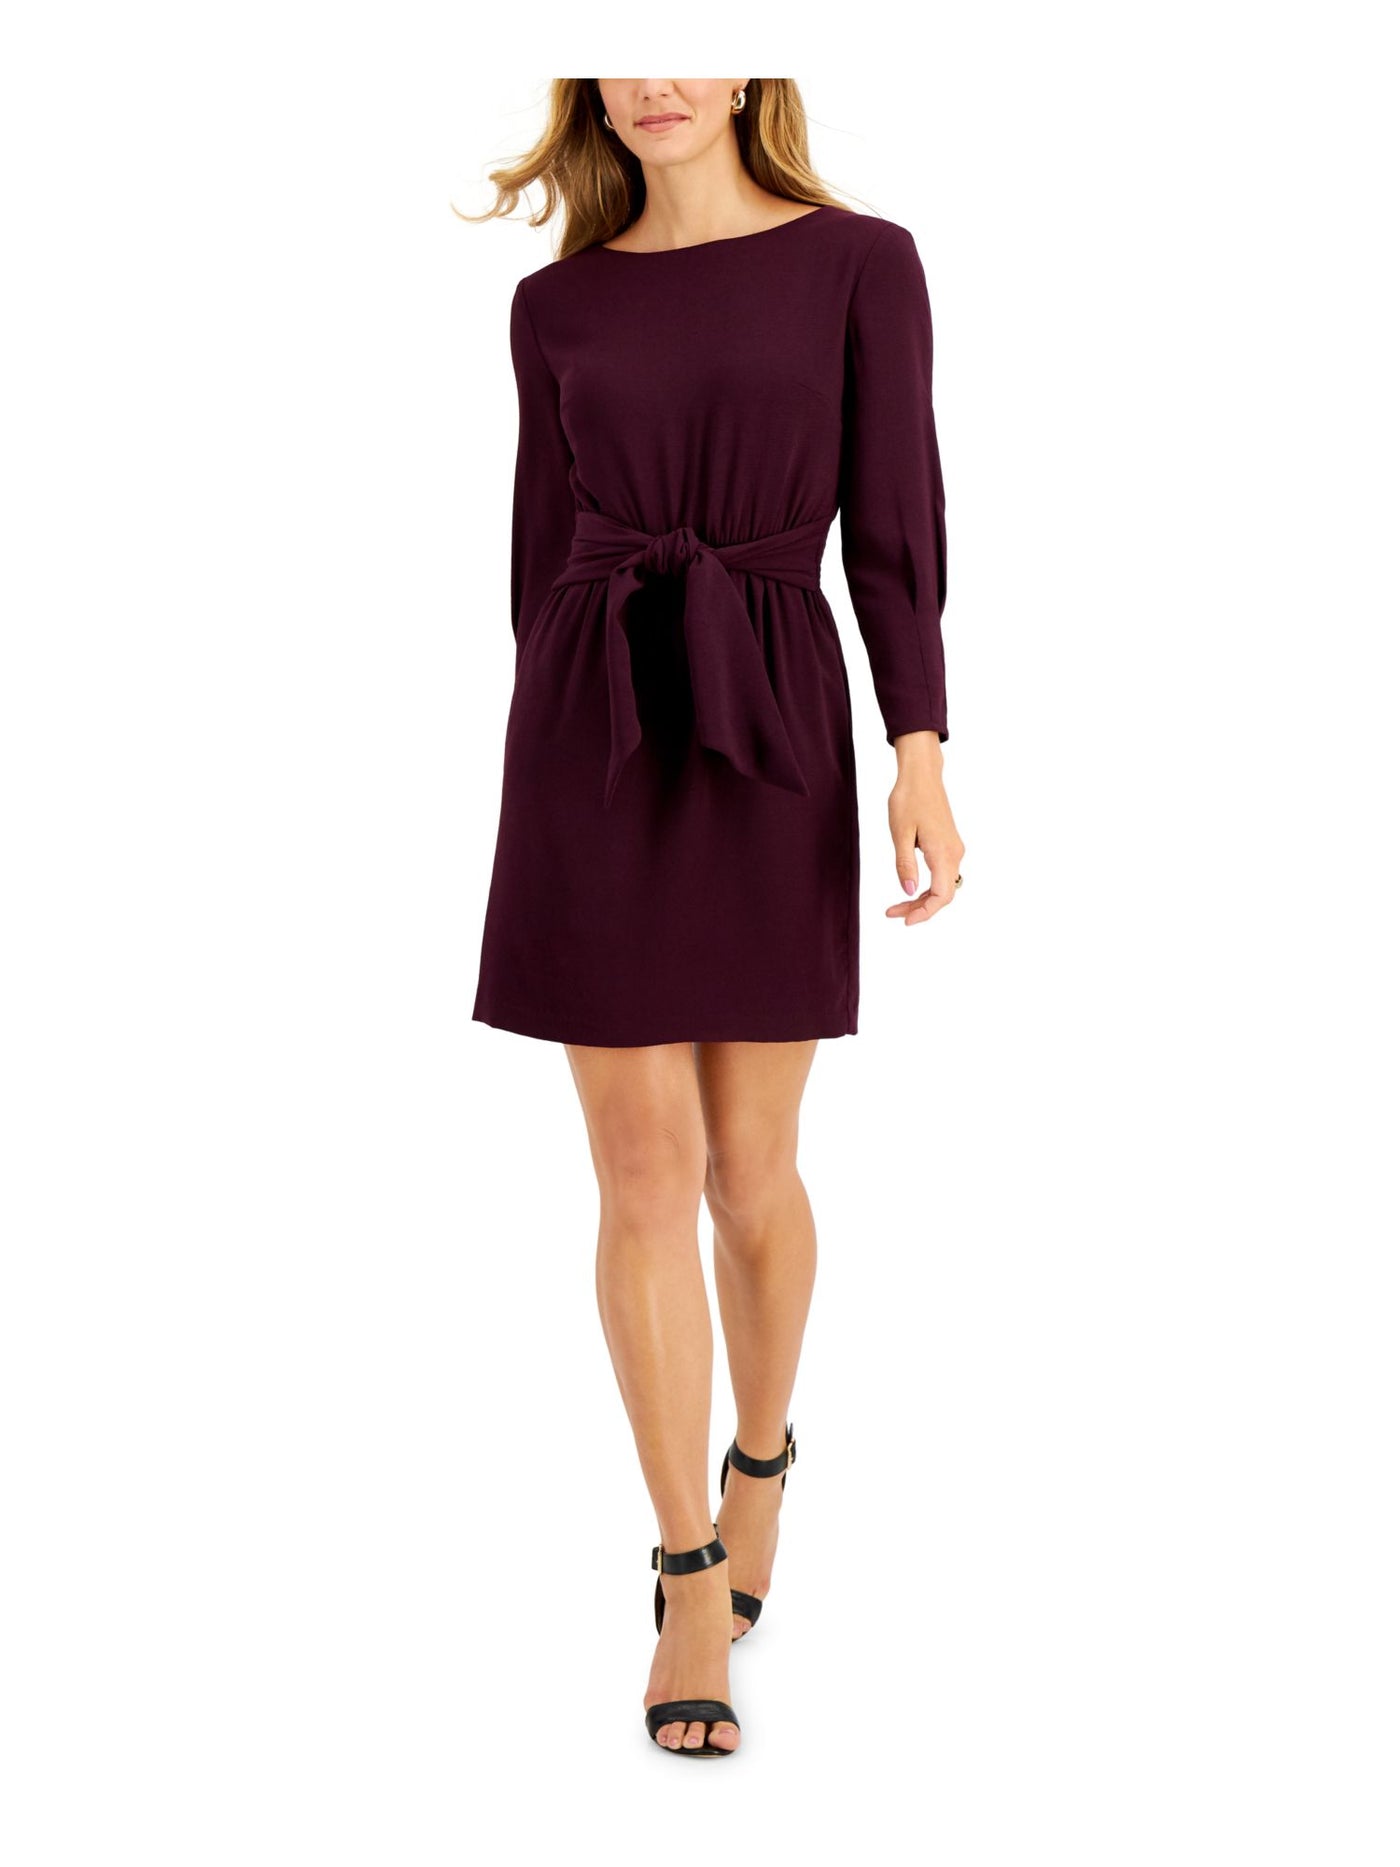 VINCE CAMUTO Womens Purple Smocked Pleated Self Tie Waist Scuba Crepe Butto 3/4 Sleeve Boat Neck Above The Knee Wear To Work Sheath Dress Petites 6P